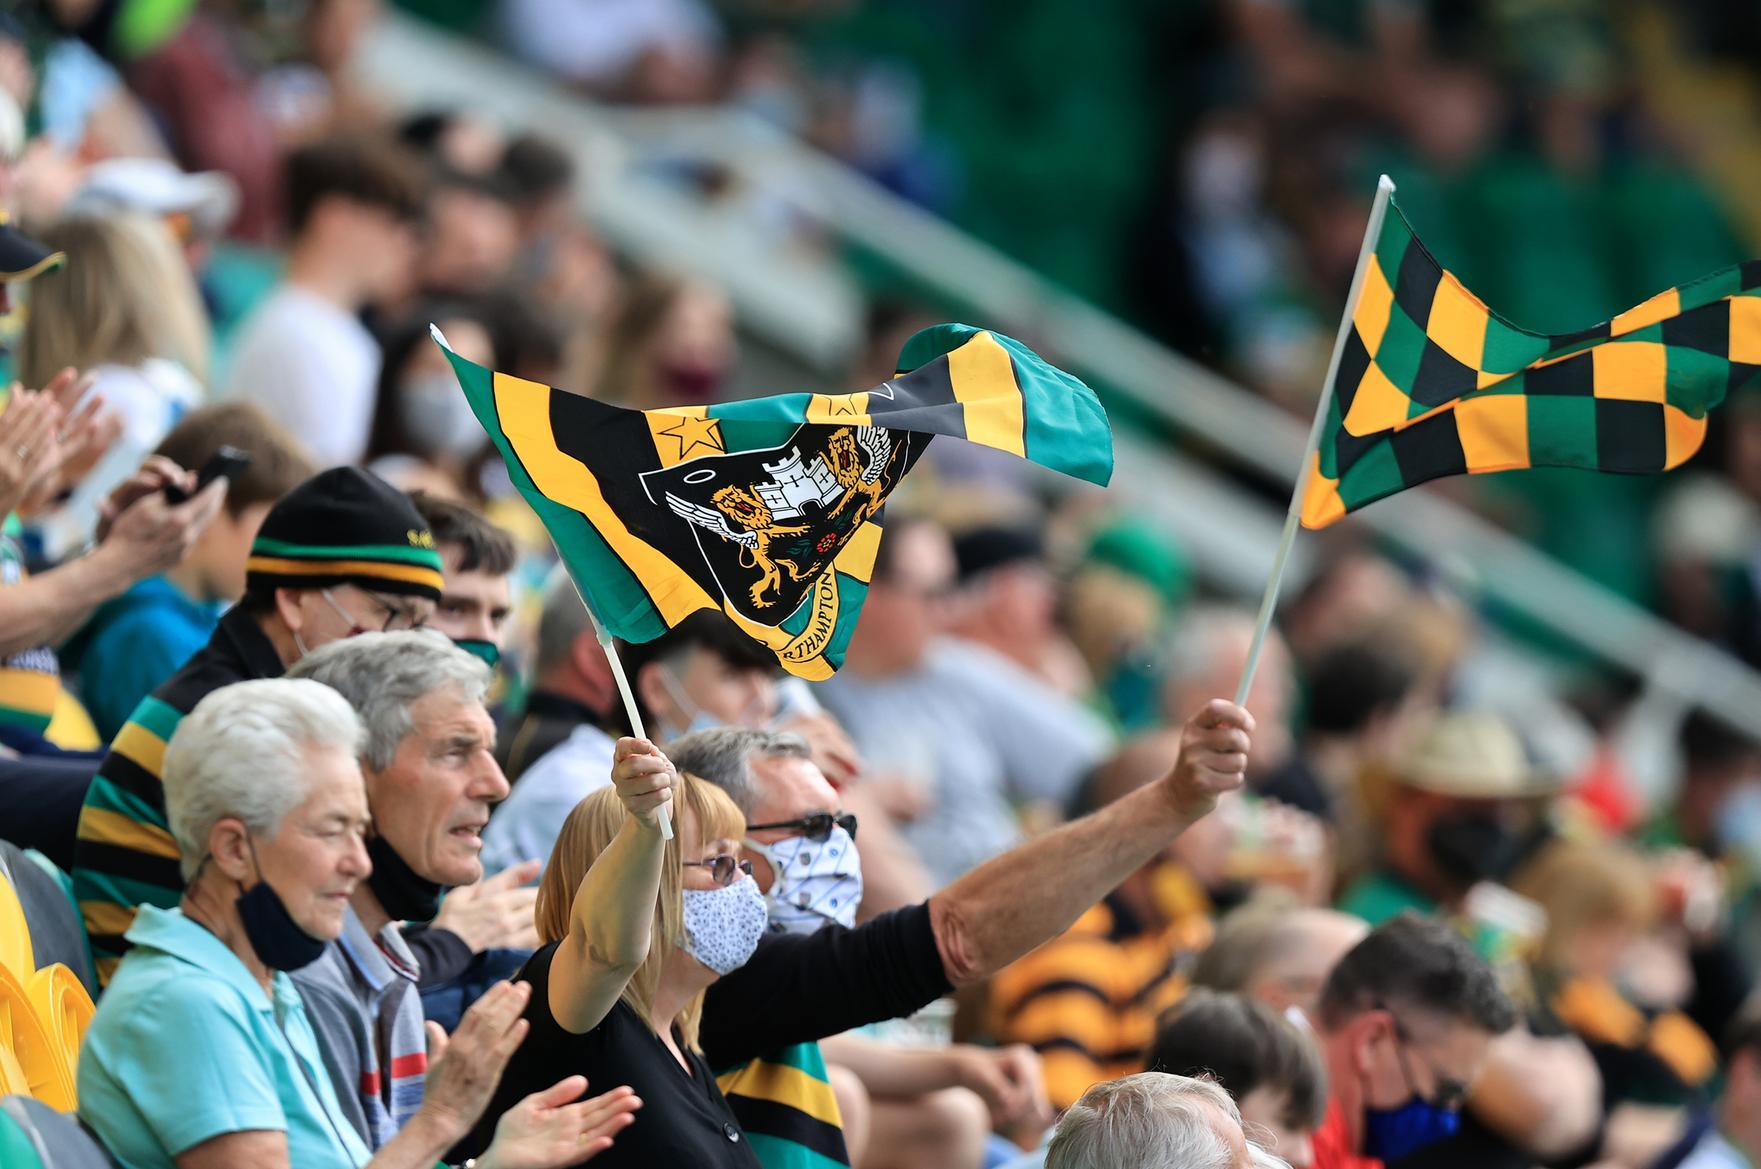 Saints supporters will soon be able to watch every Gallagher Premiership game